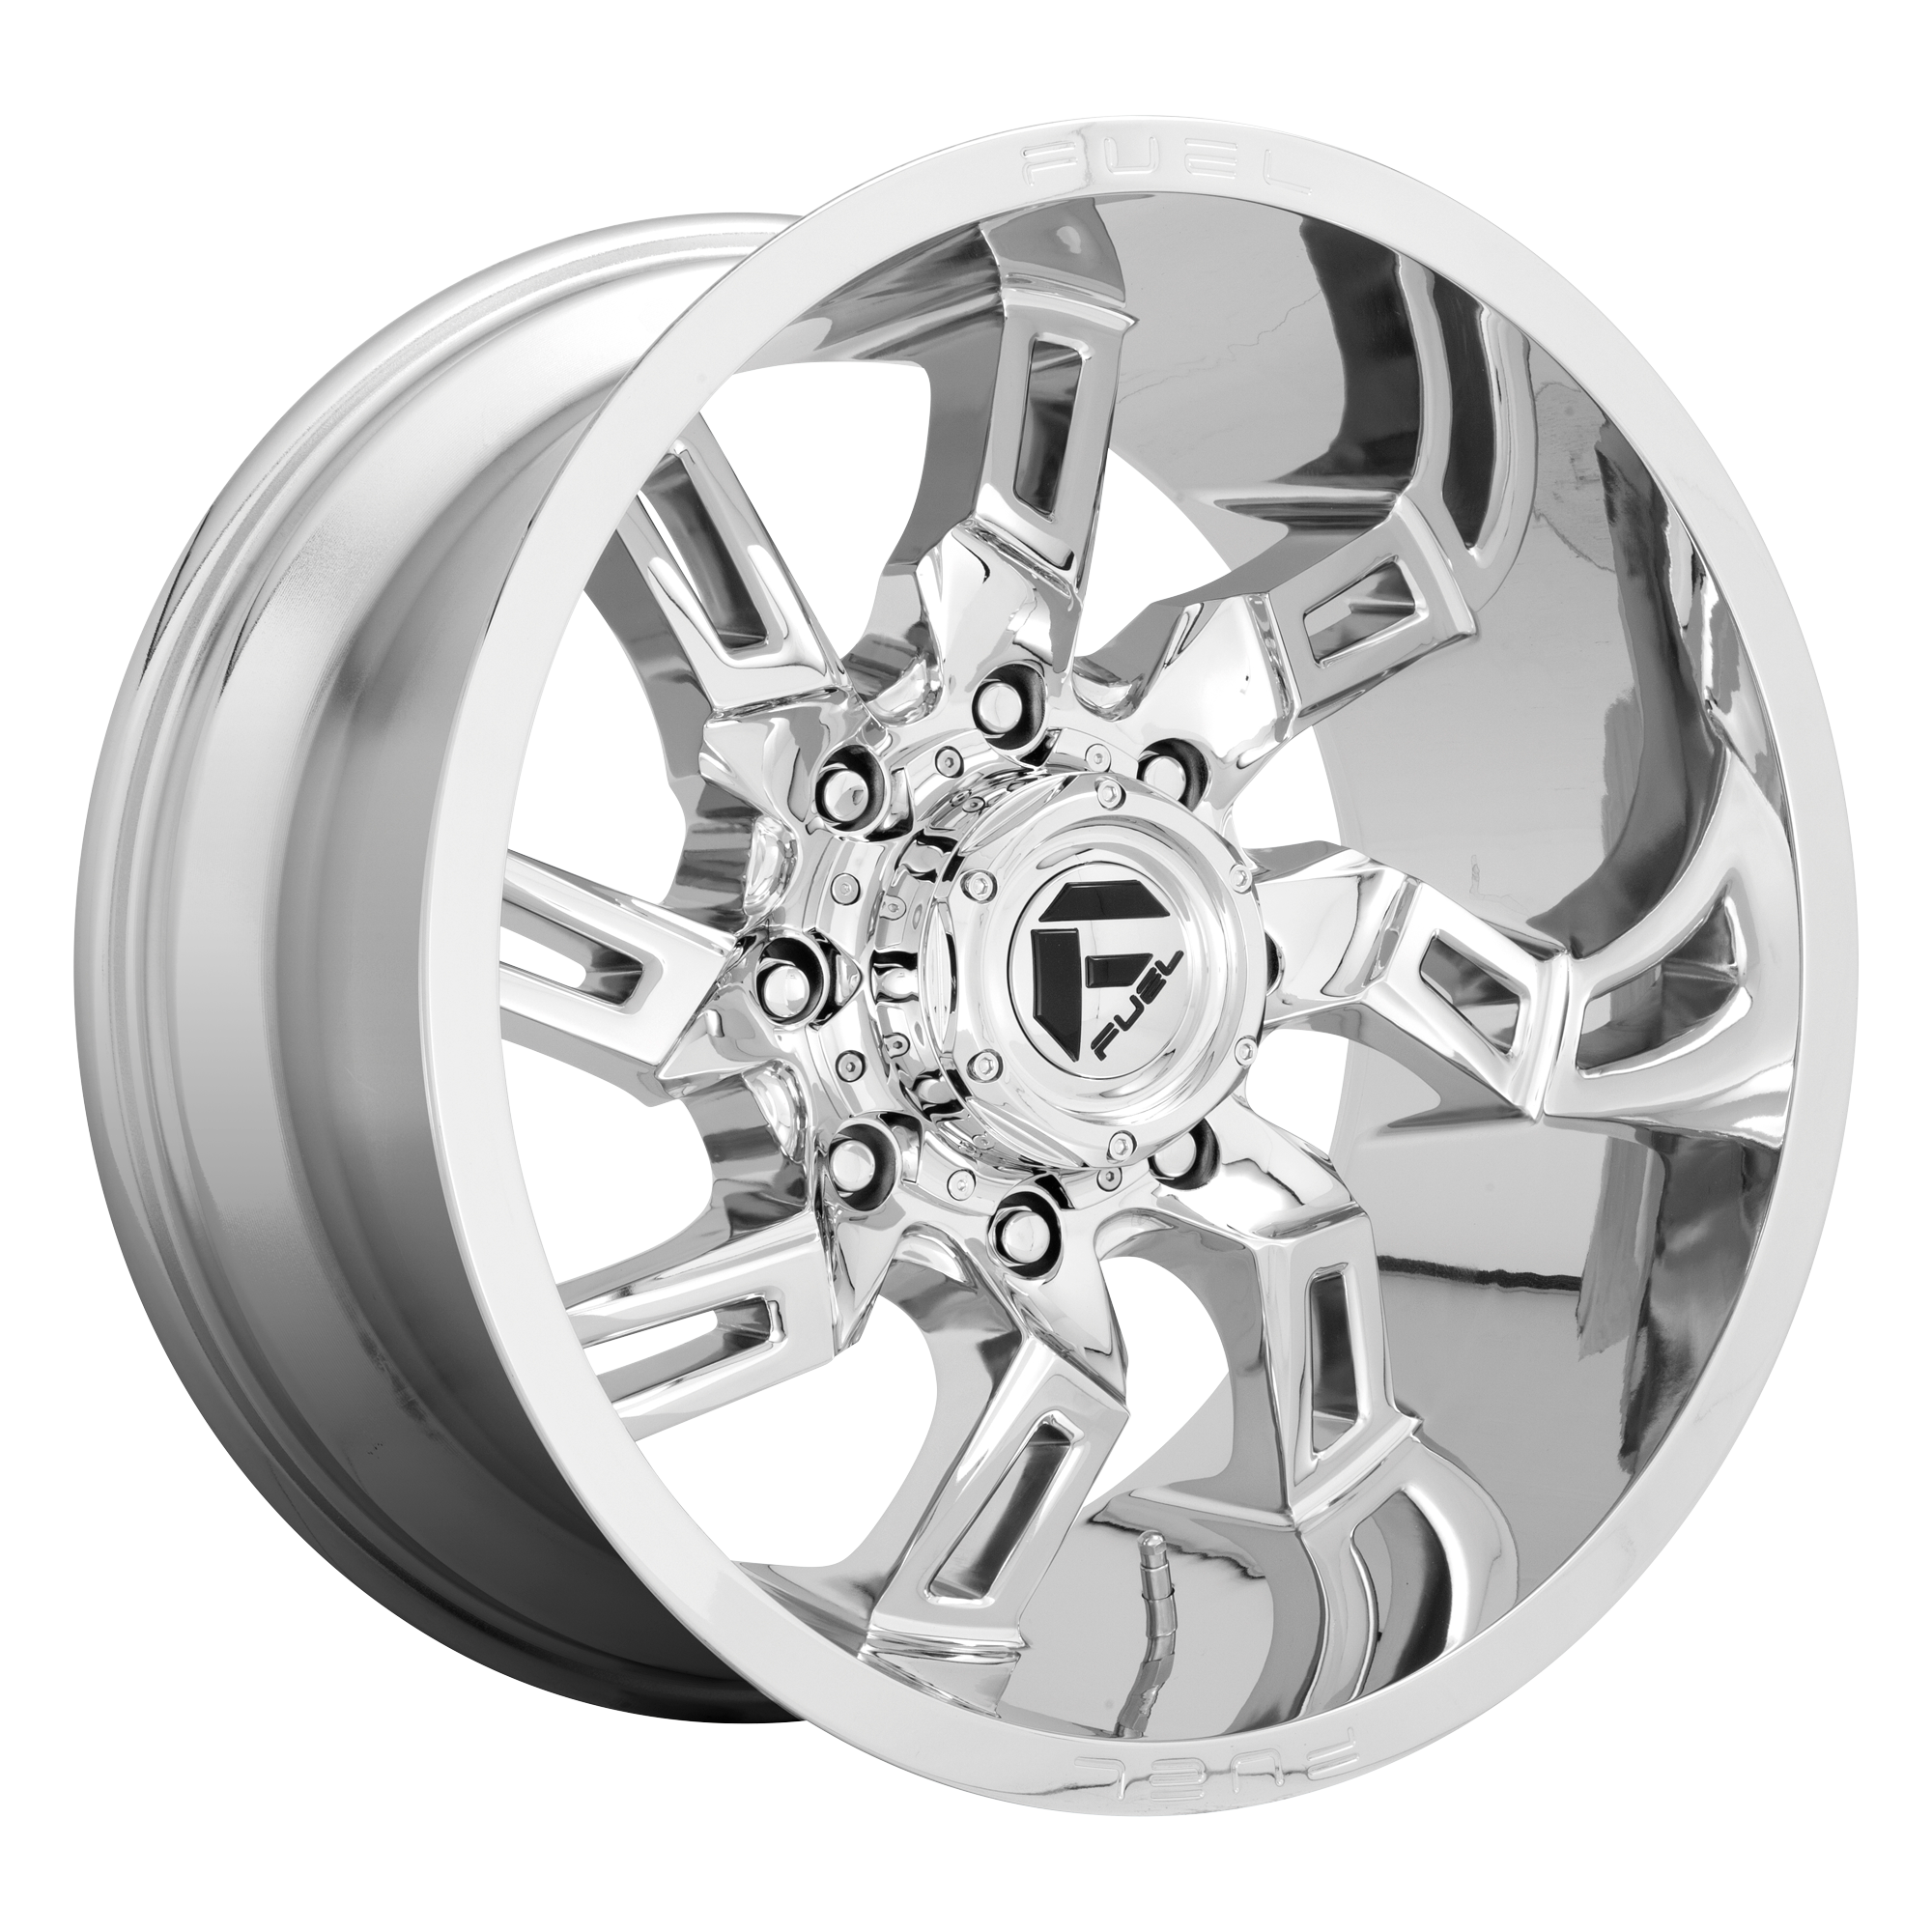 LOCKDOWN 20x9 6x135.00 CHROME (1 mm) - Tires and Engine Performance